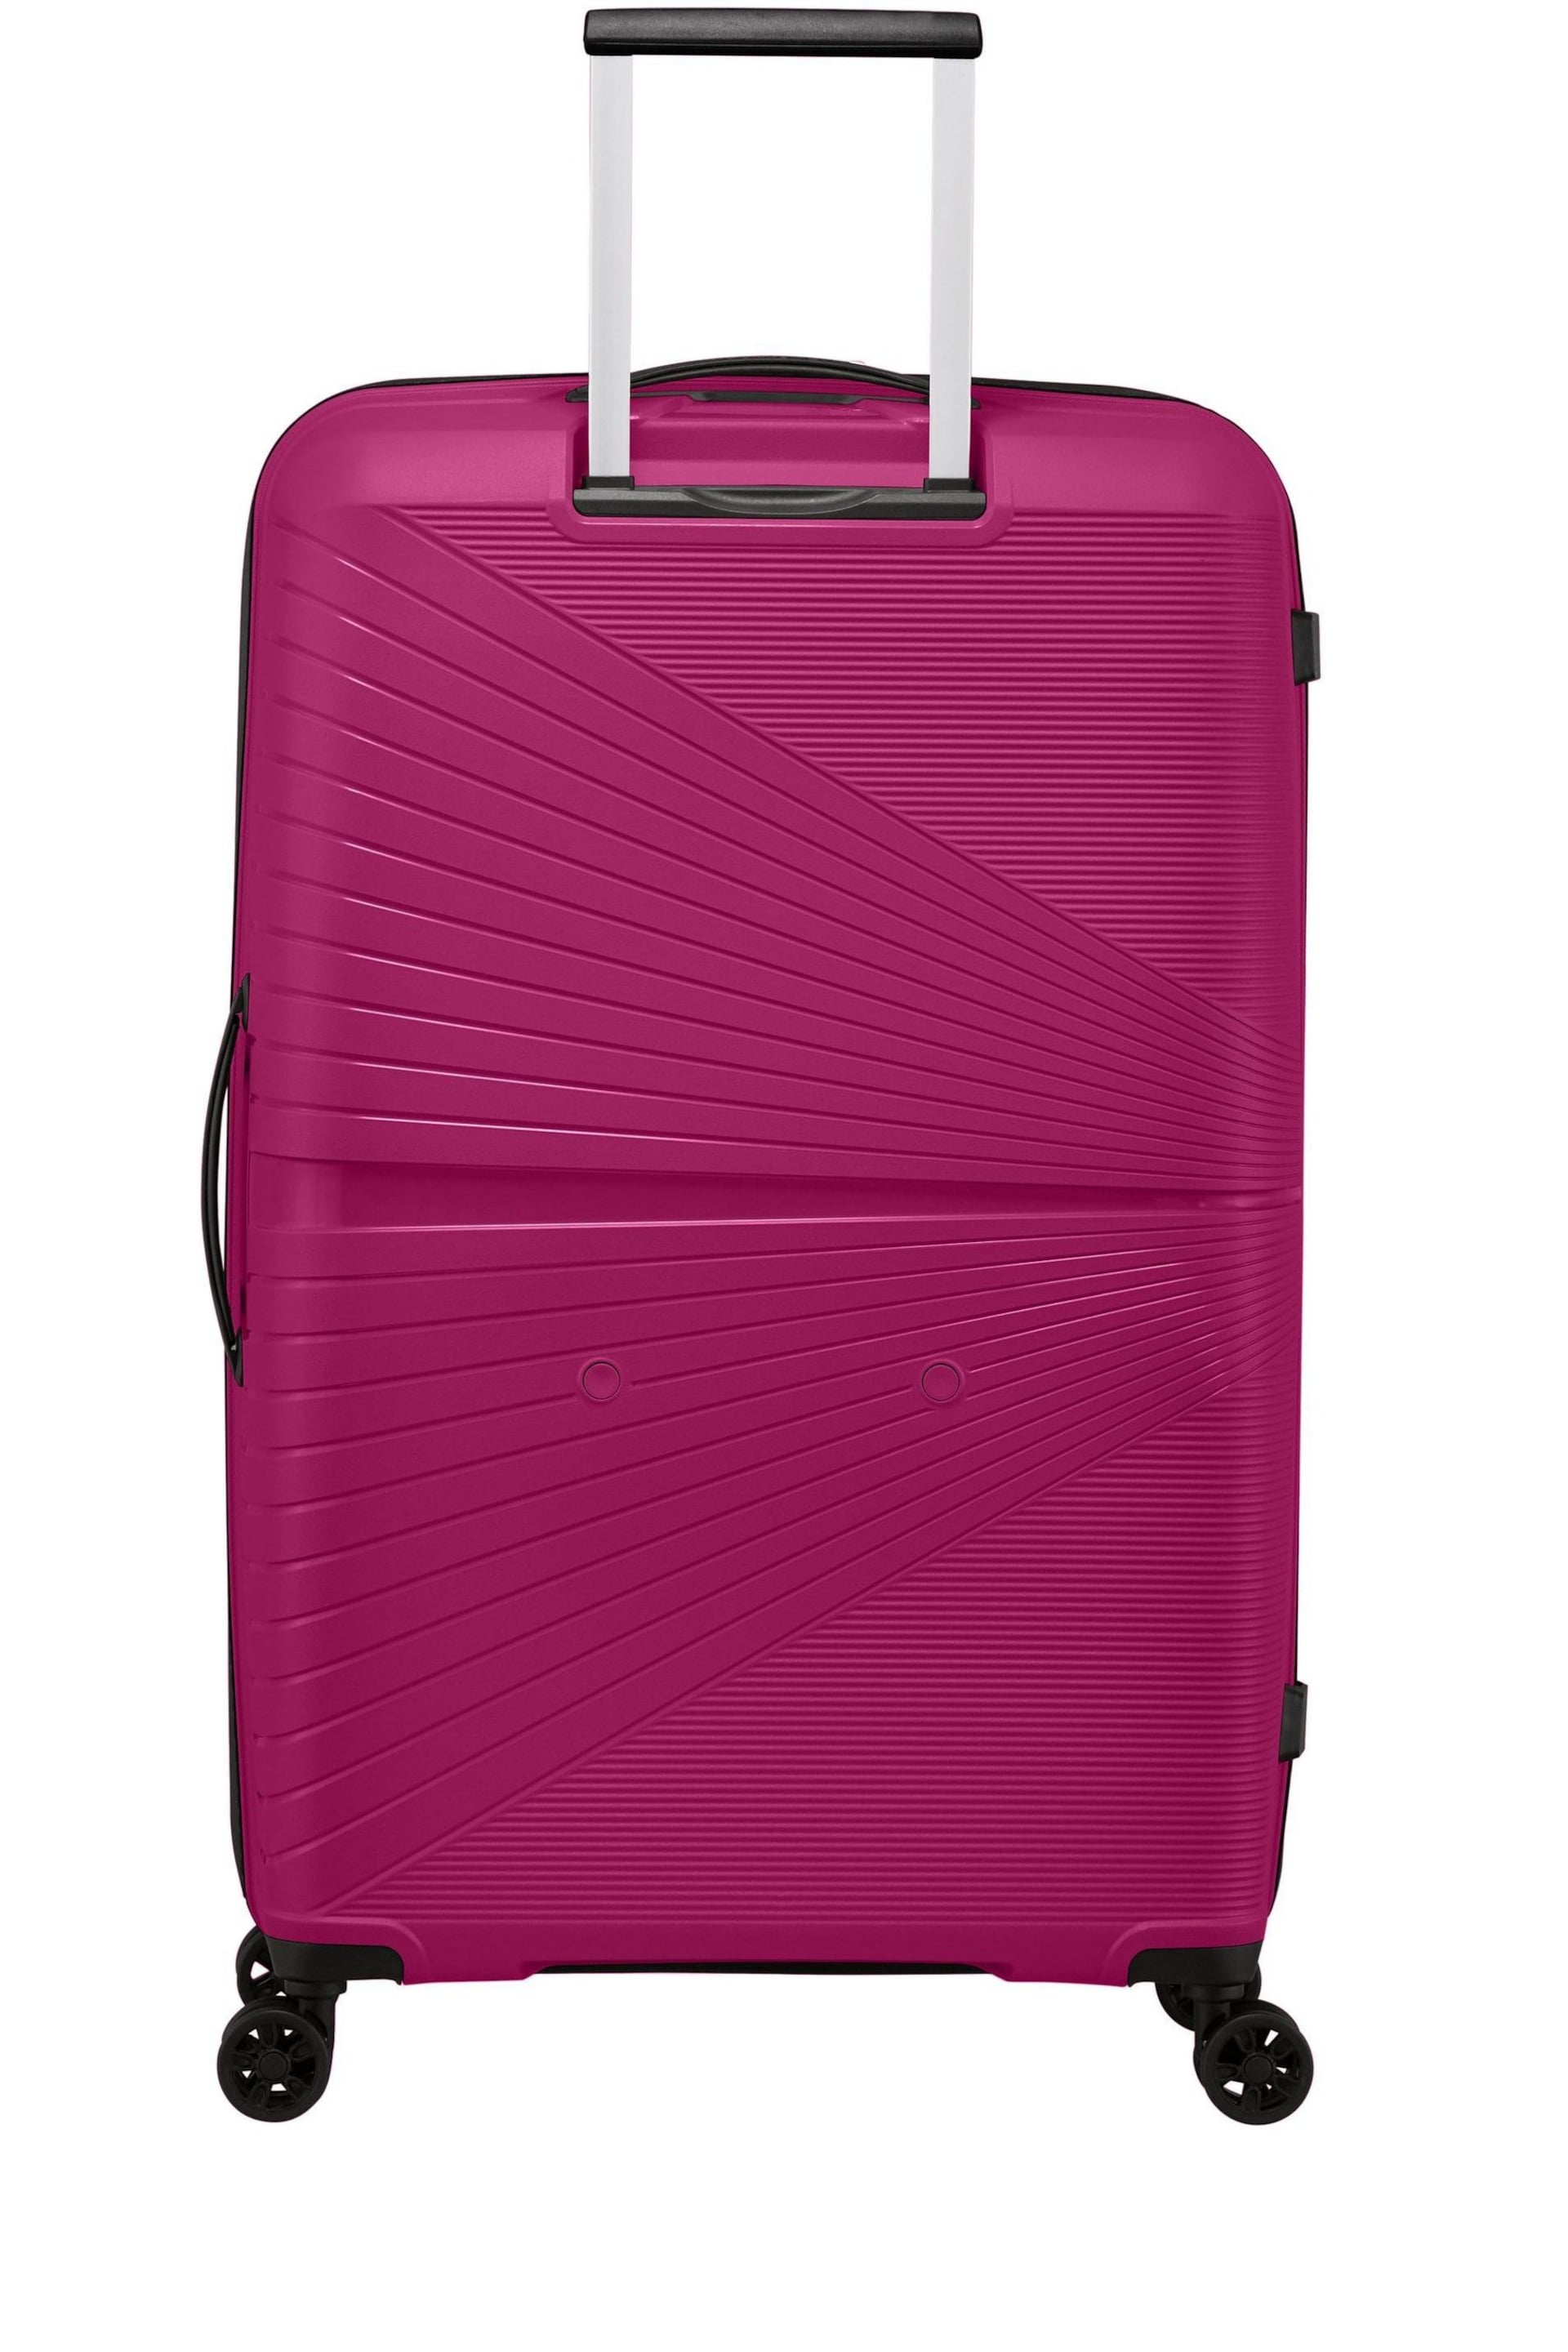 American Tourister Large Airconic 77cm Four-Wheel Suitcase - Image 2 of 2